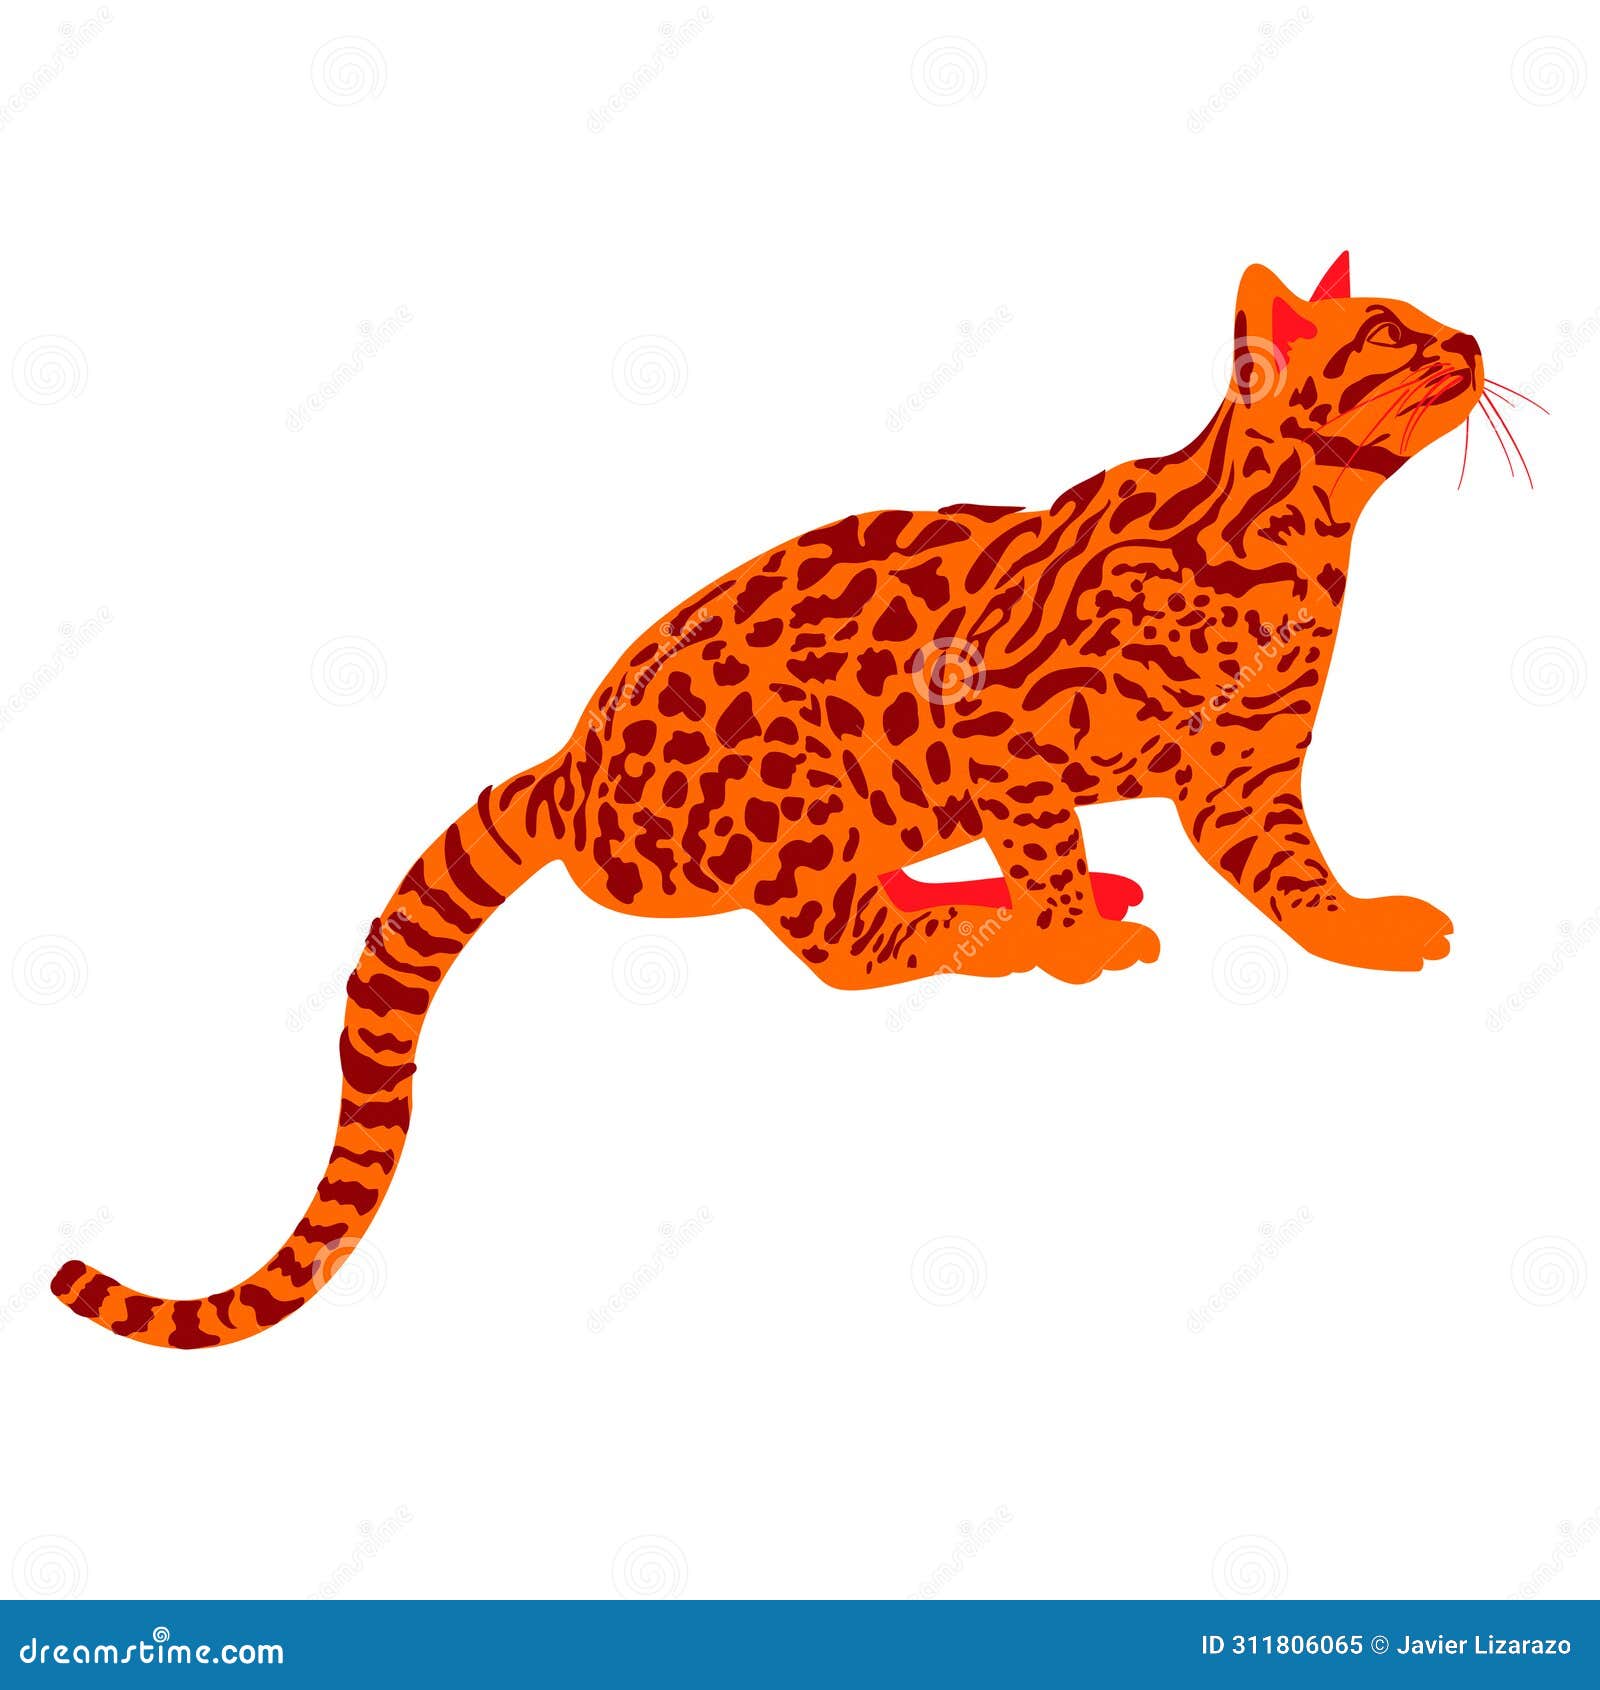 artistic  of a sitting ocelot watching possible prey